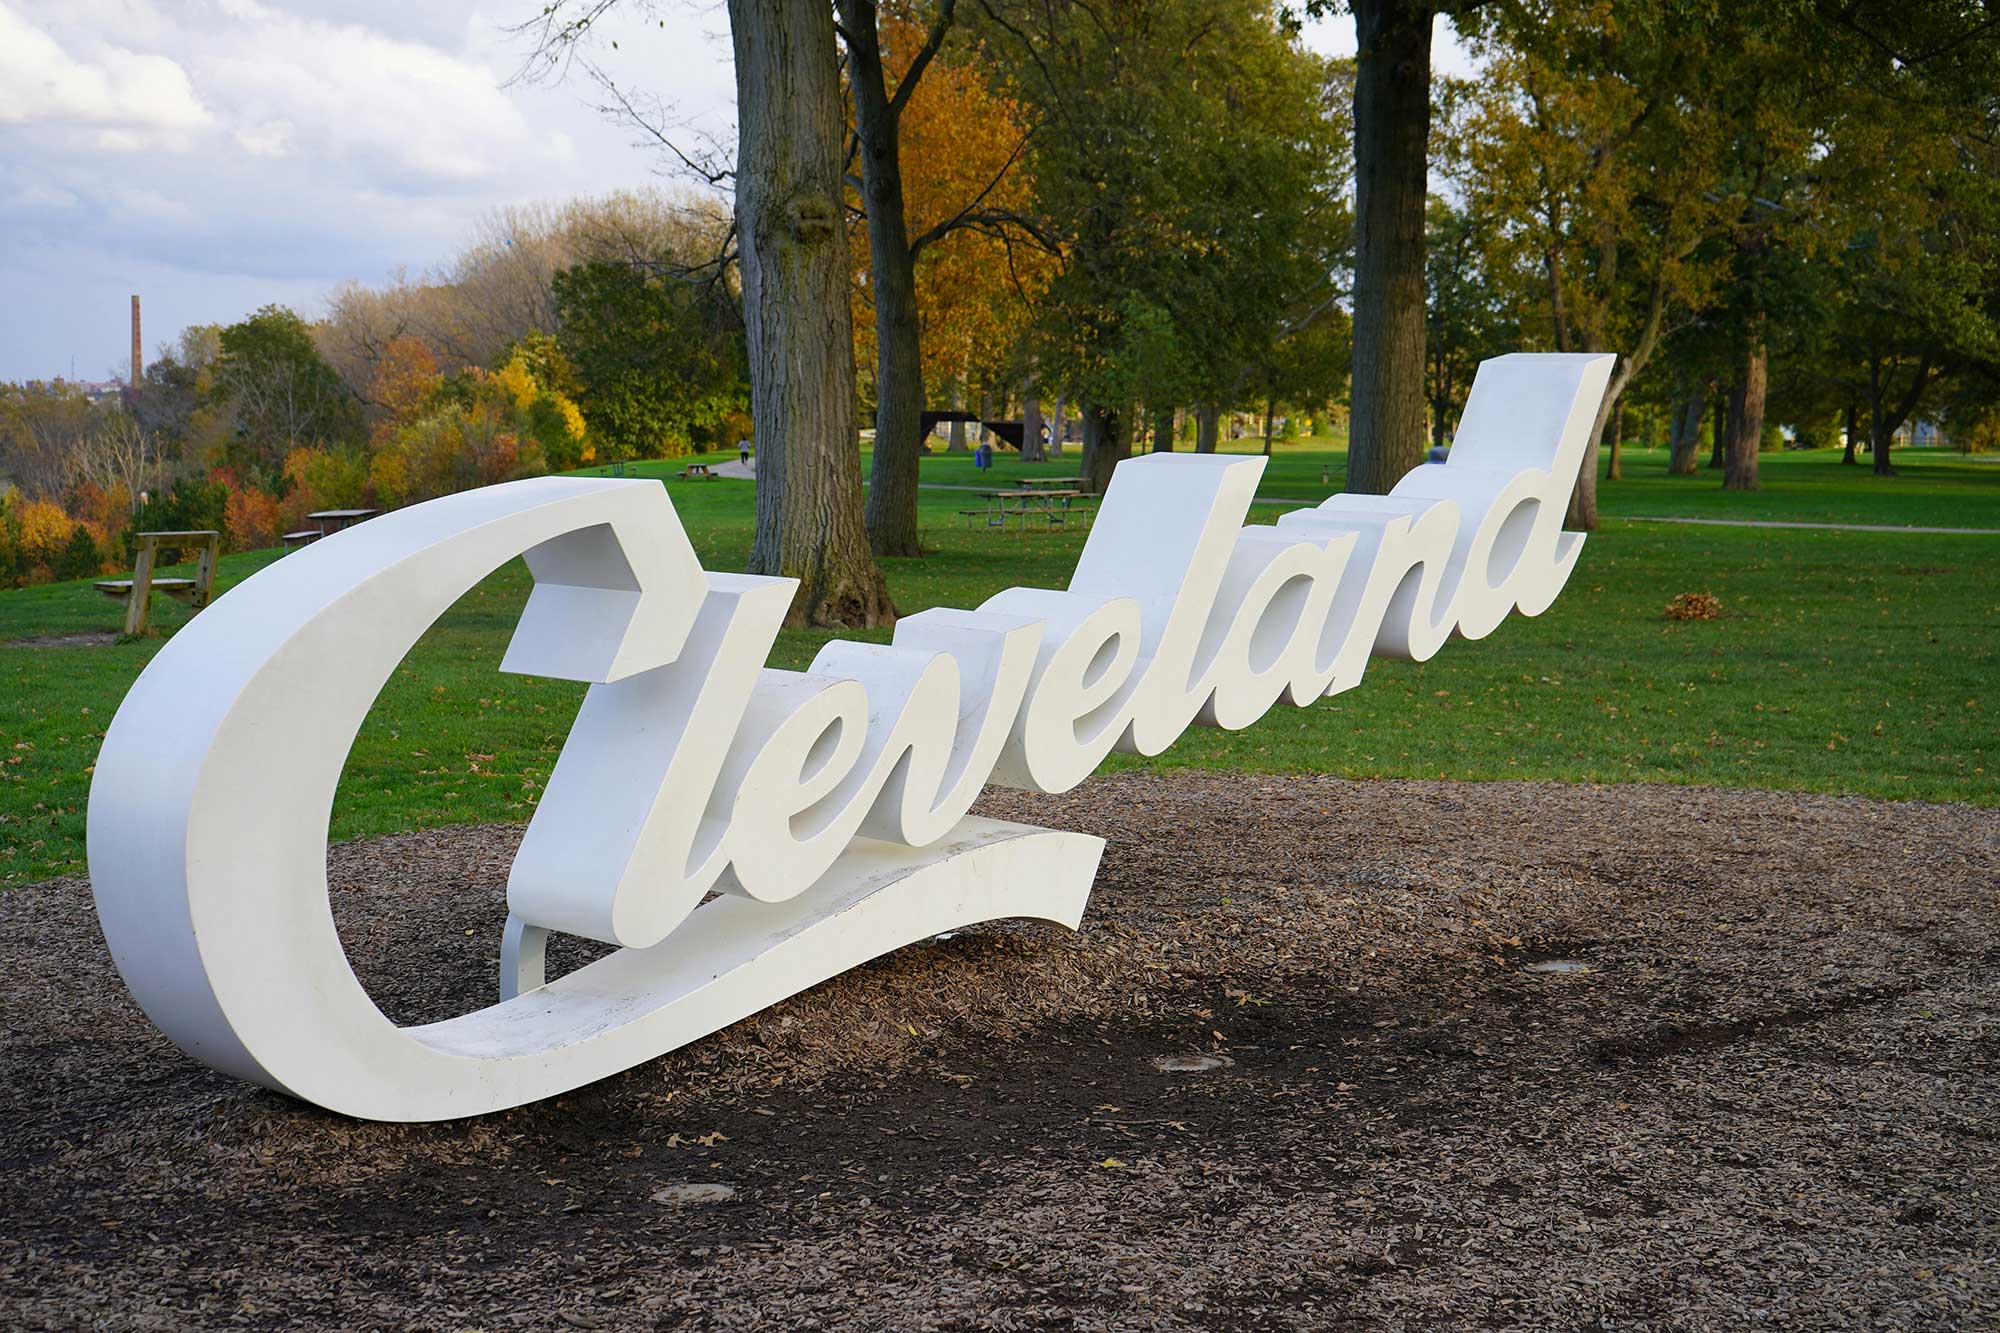 The iconic Cleveland sign in Cleveland, Ohio